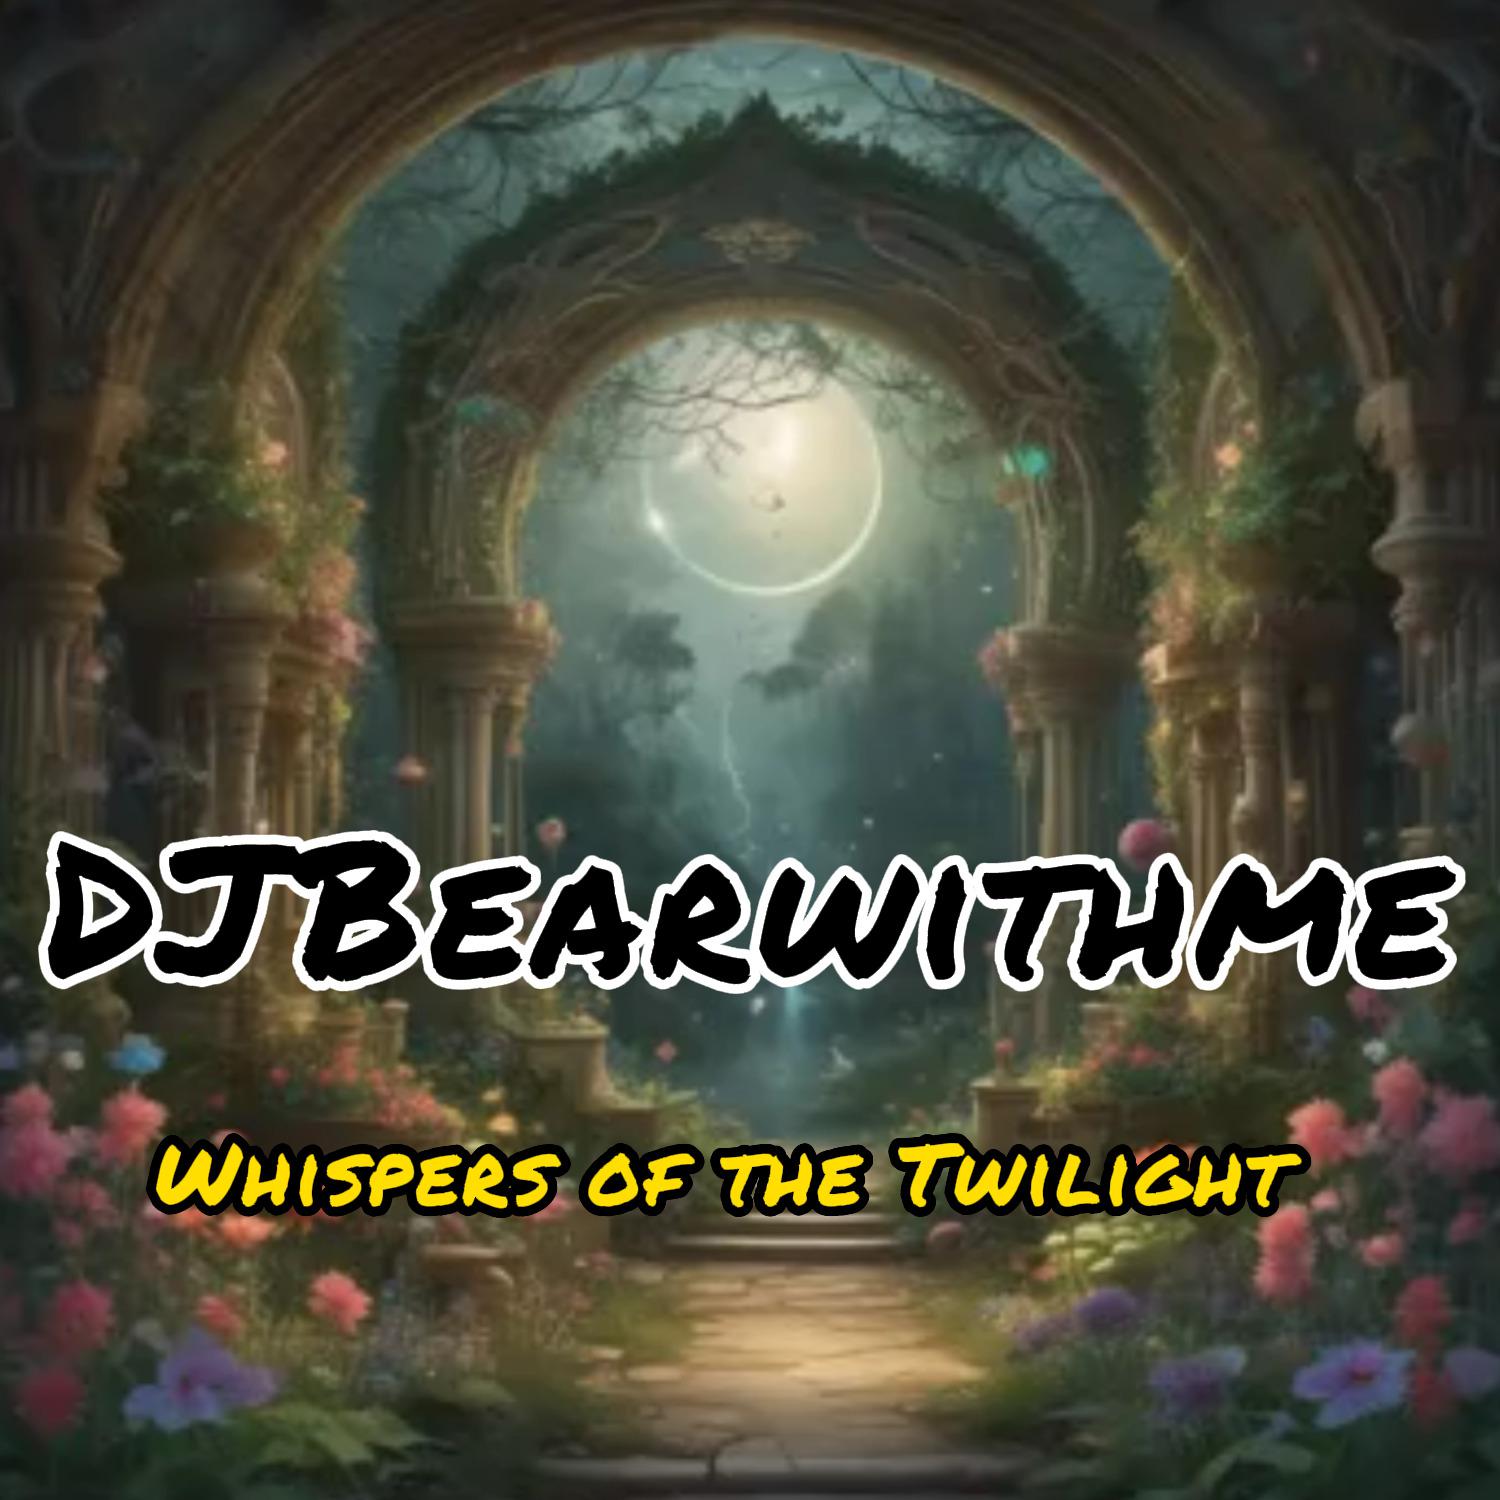 DJBearwithme - Whispers of the Twilight (Instrumental)